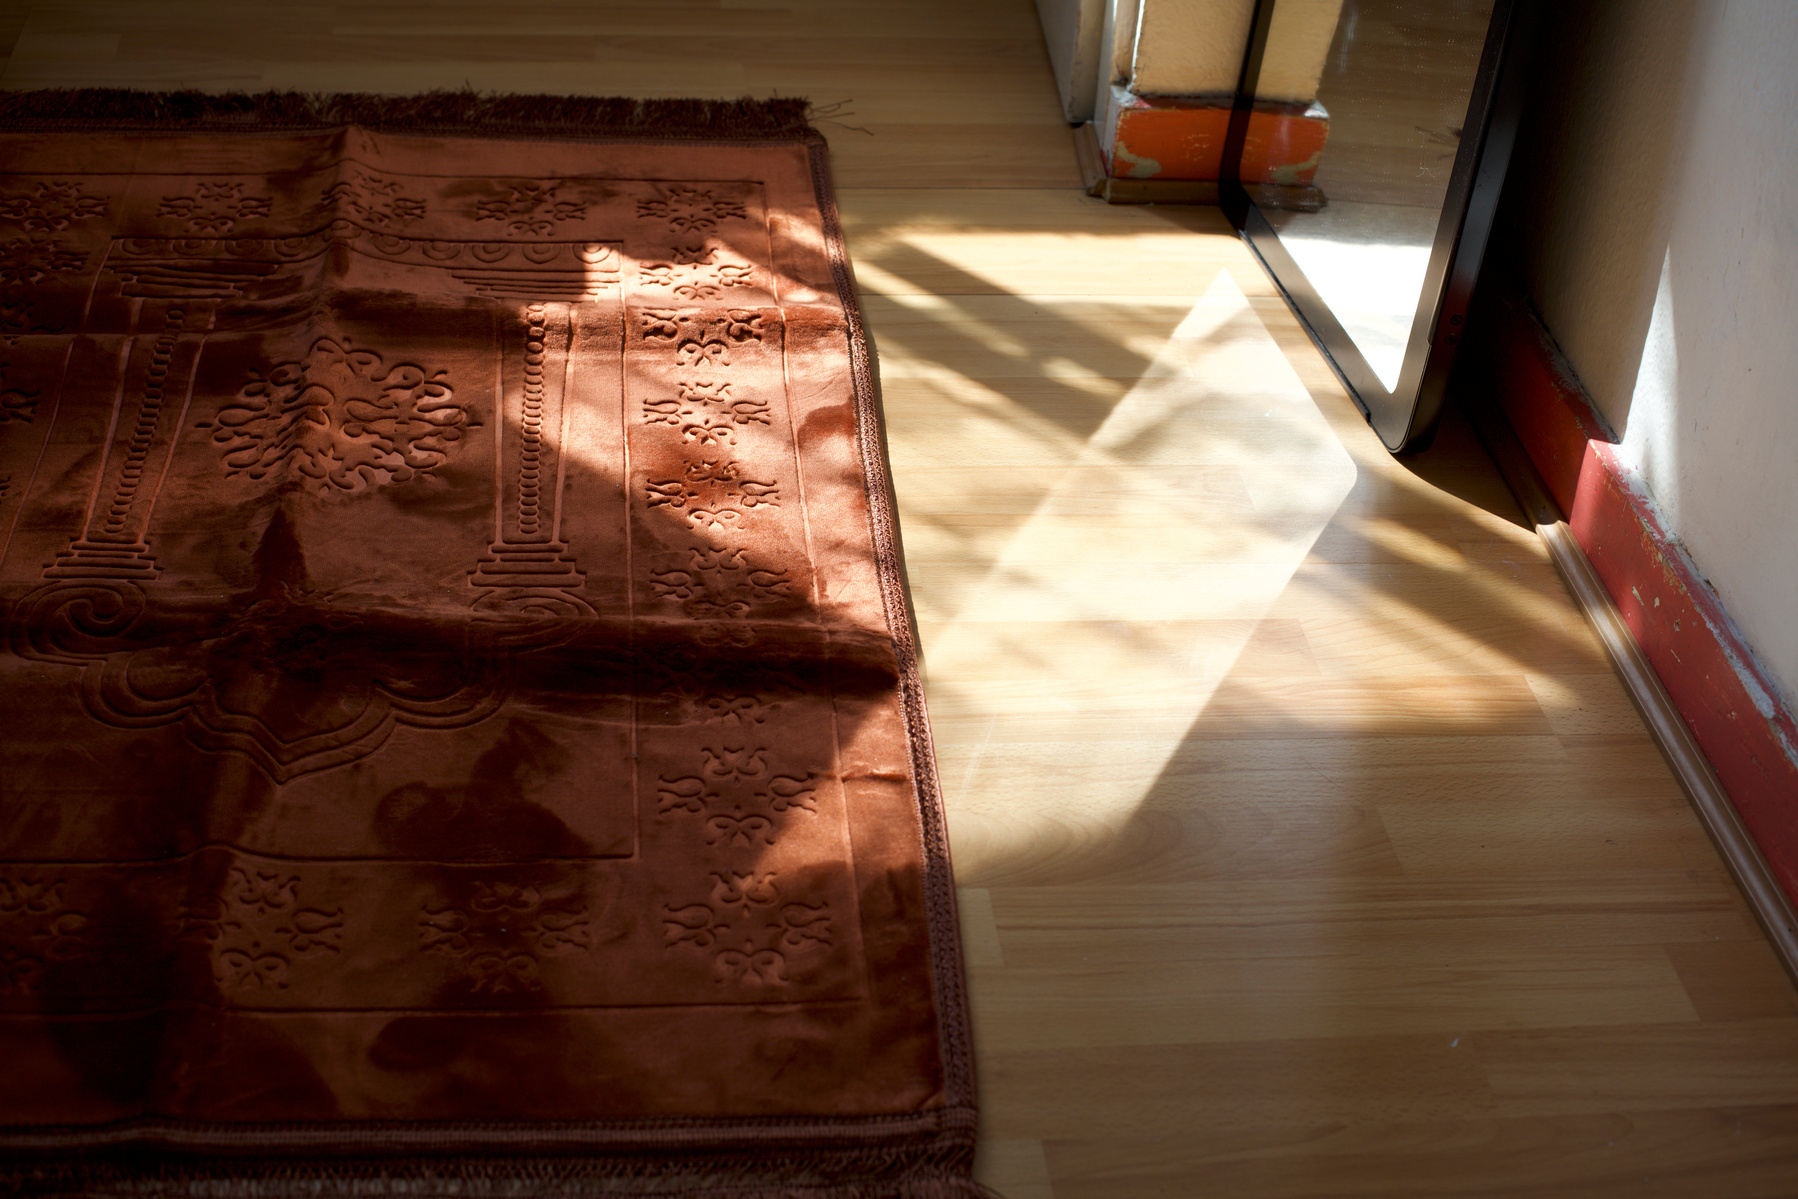 A rich brown rug on a light laminate floor, the rug's right edge almost bisects the image.  In the top right corner, the bottom of a mirror can be seen; it reflects sunlight from above onto the floor and rug.